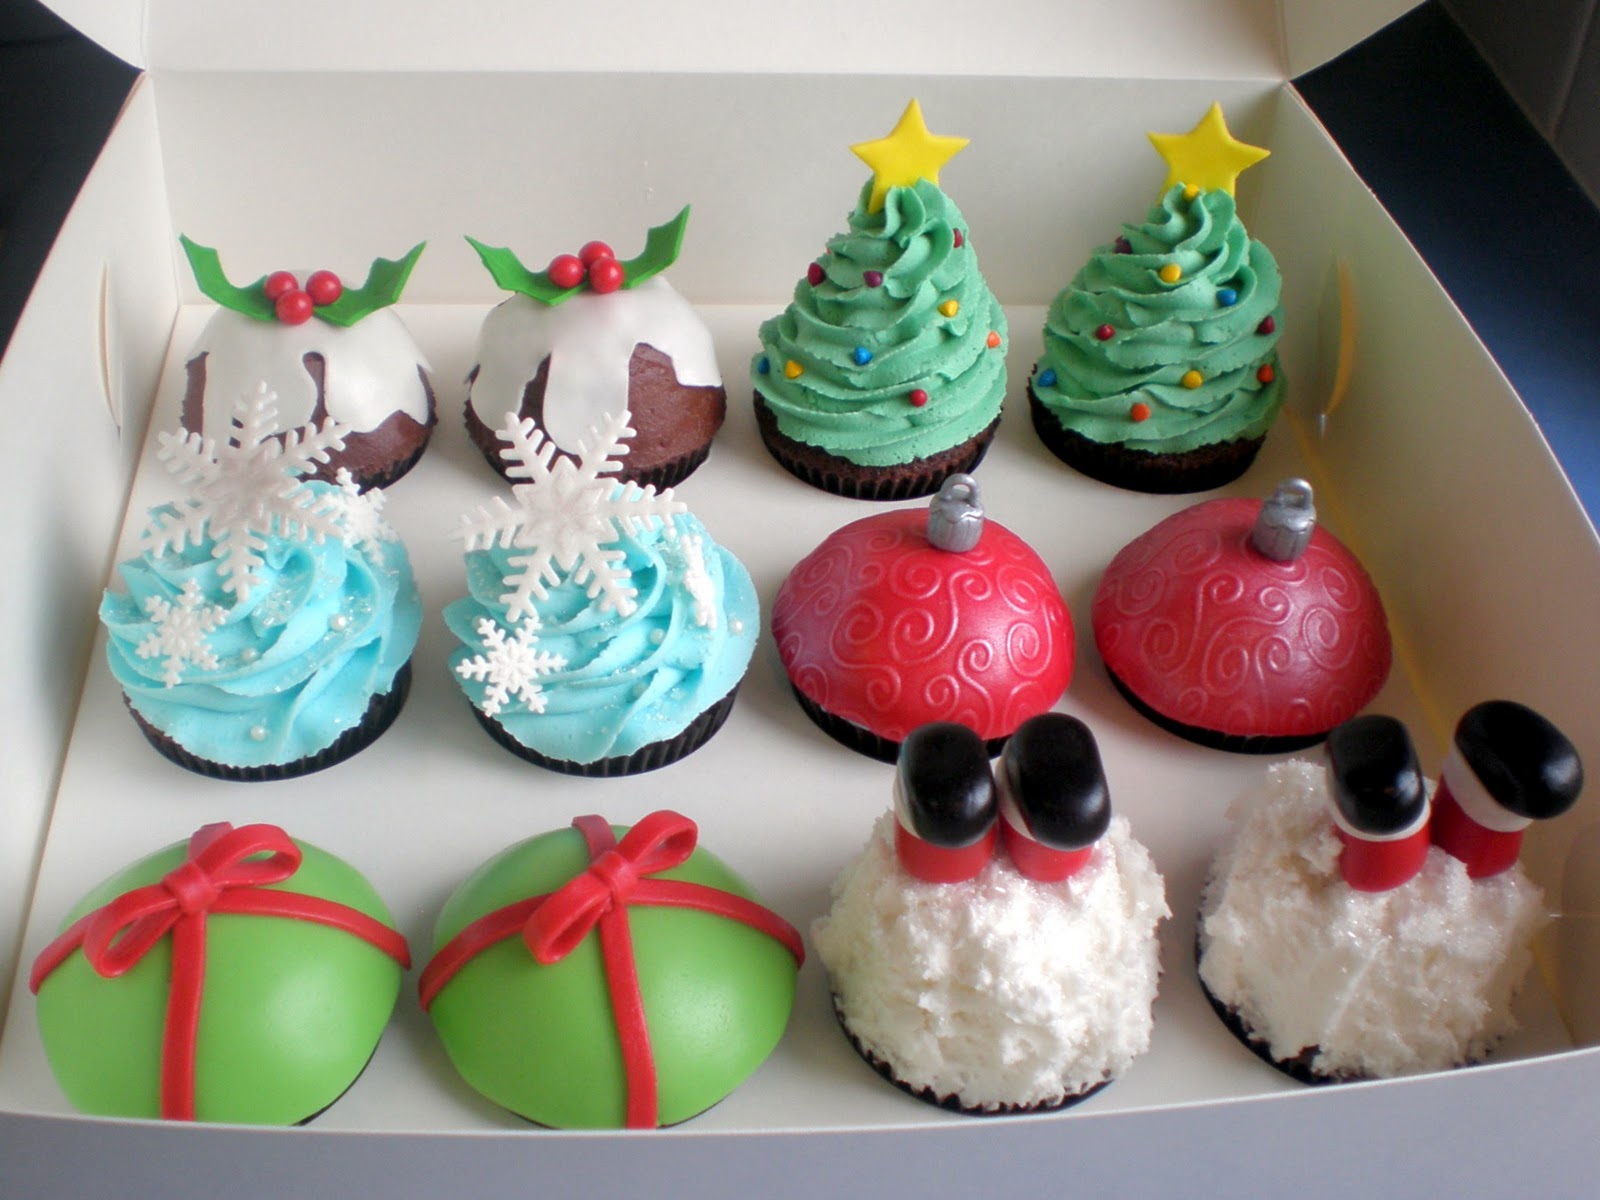 Pictures Of Christmas Cakes And Cupcakes